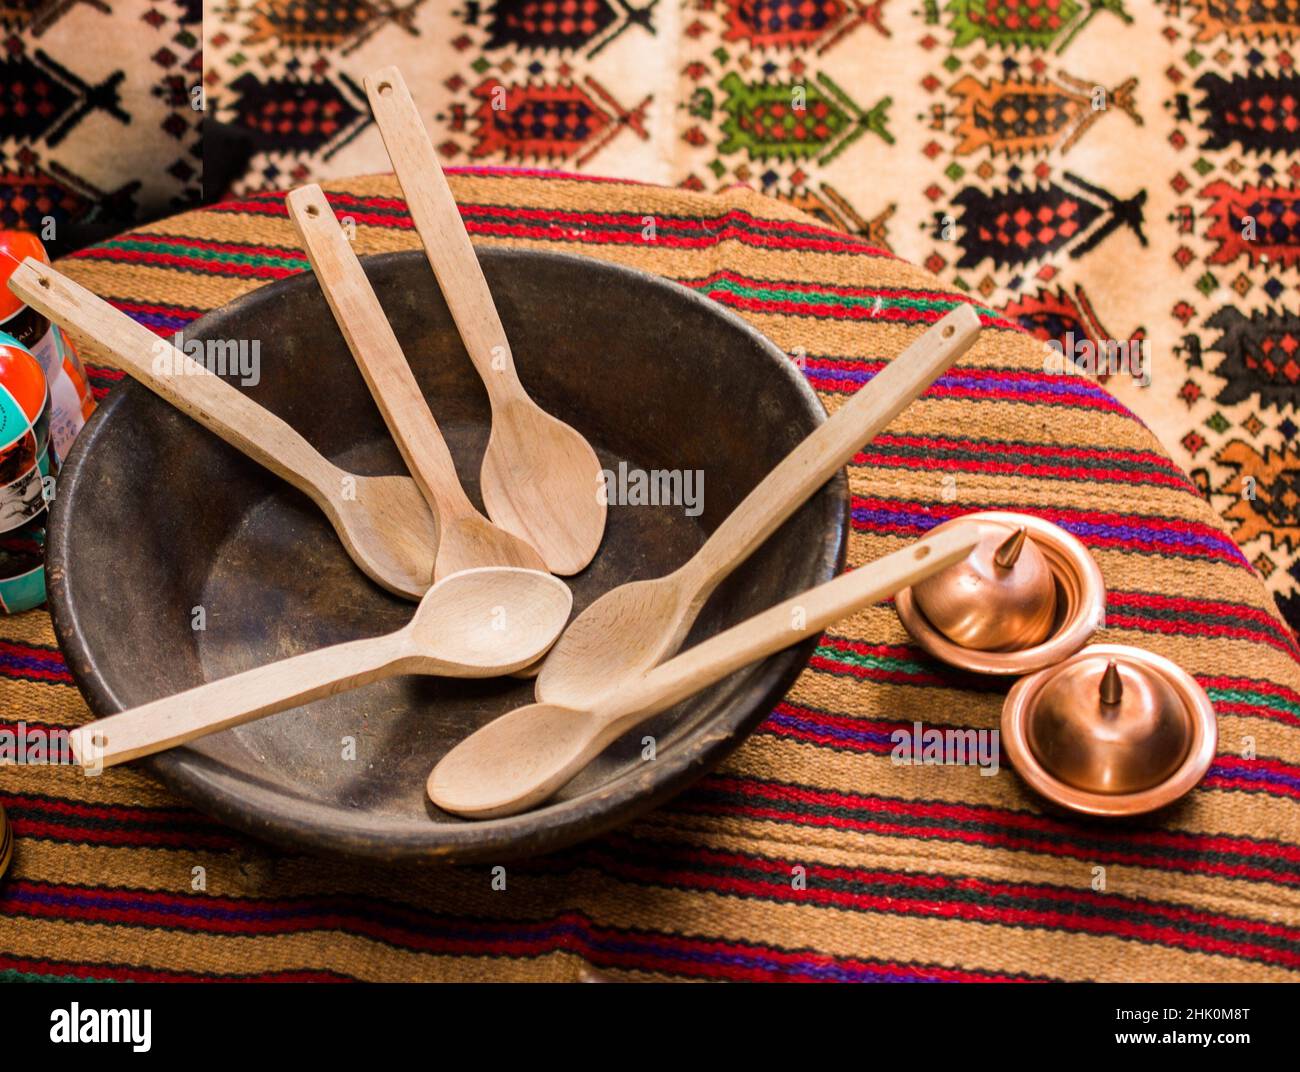 dozens of soup spoon or tablespoon made of wood. Stock Photo